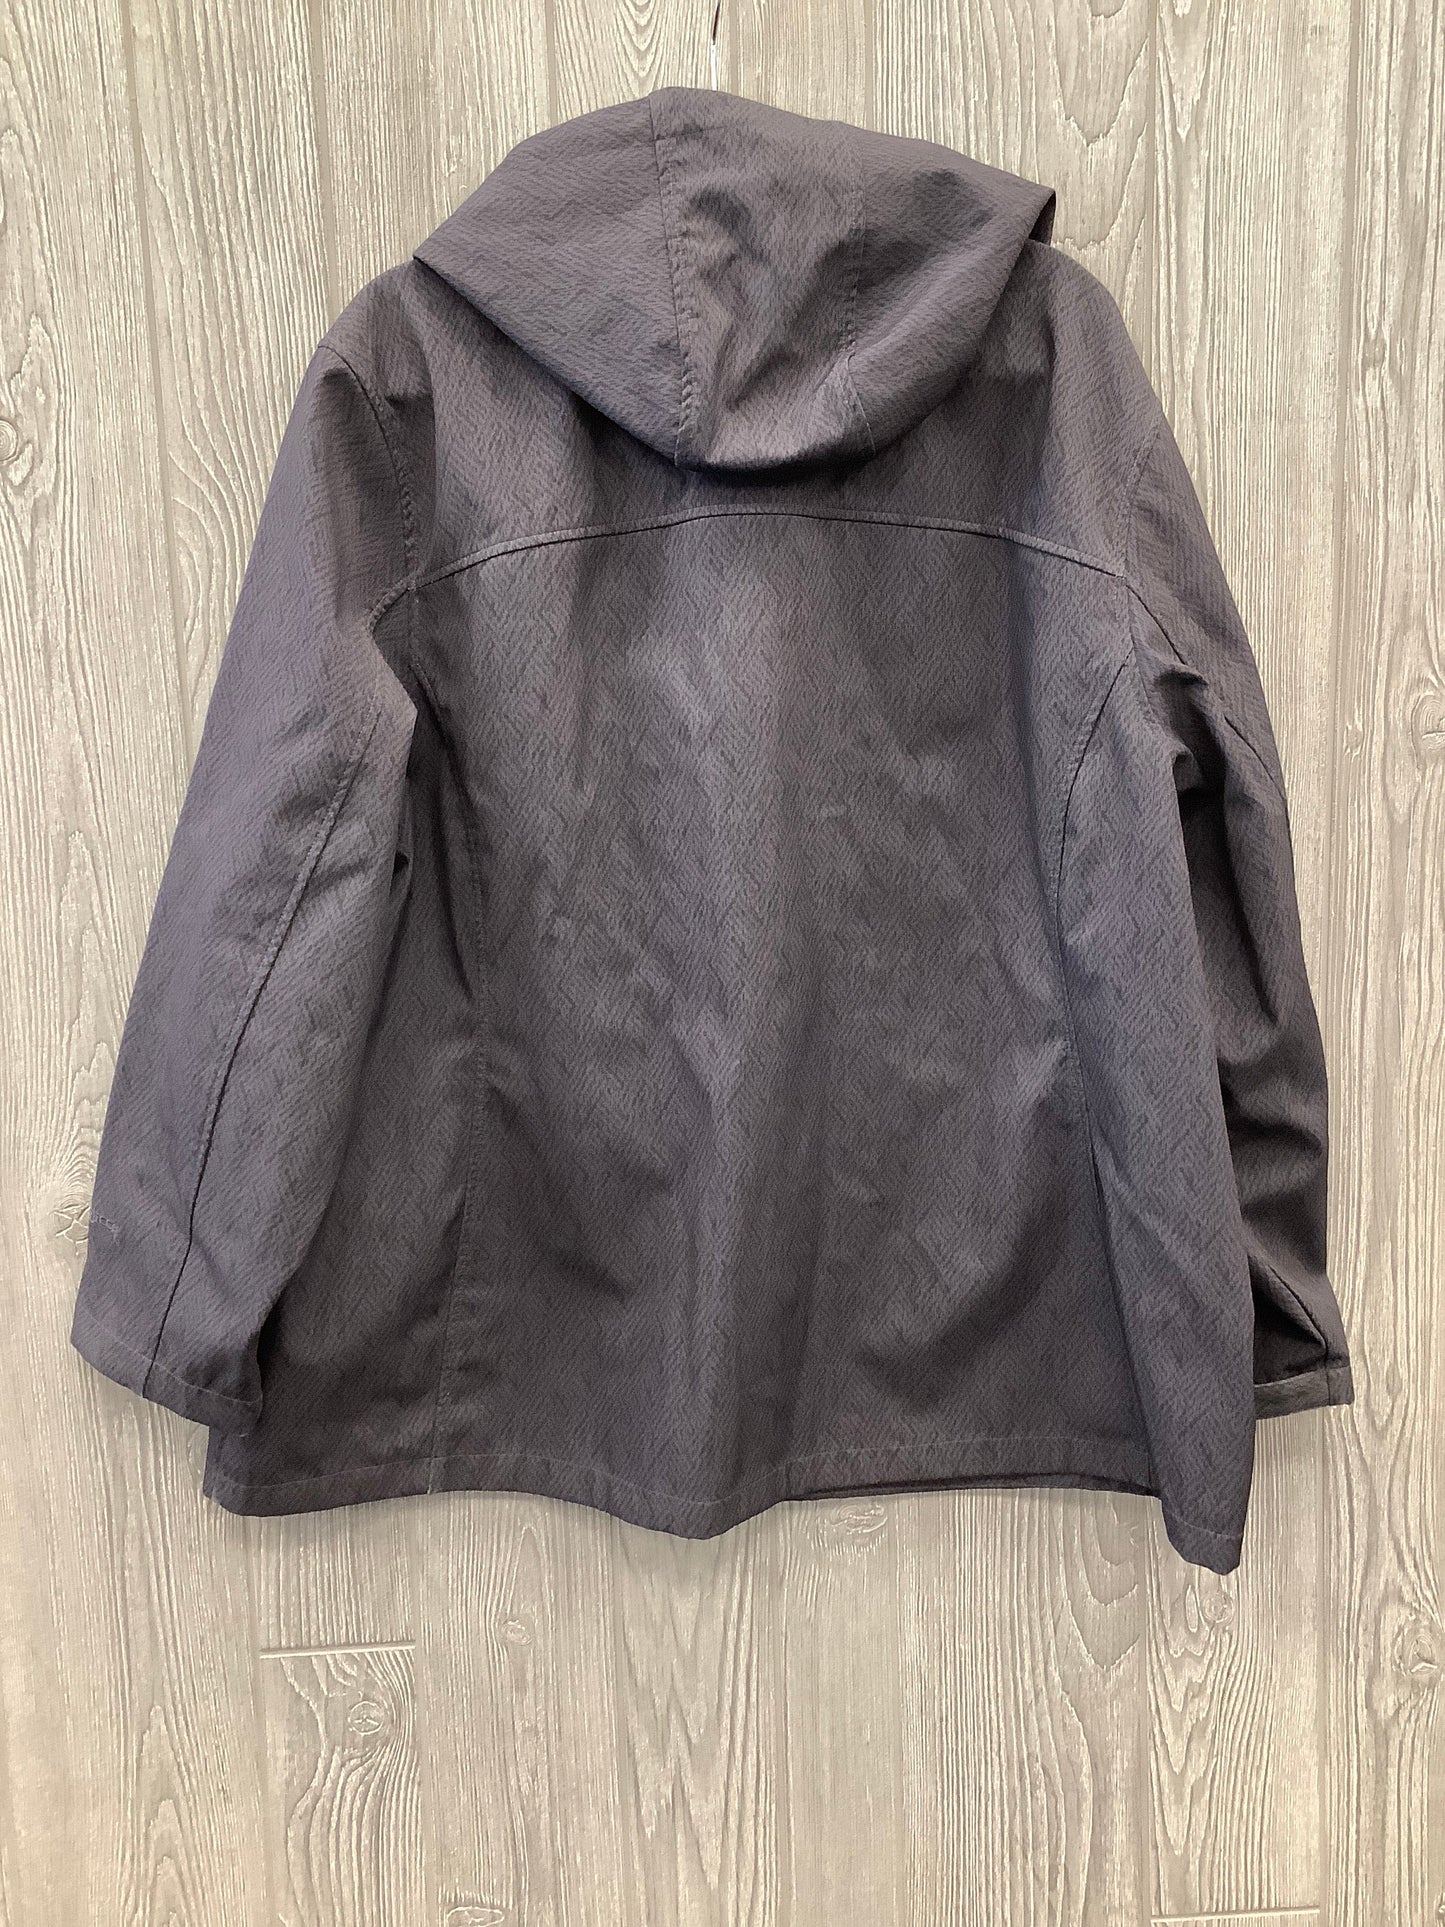 Grey Coat Other Freetech, Size 3x